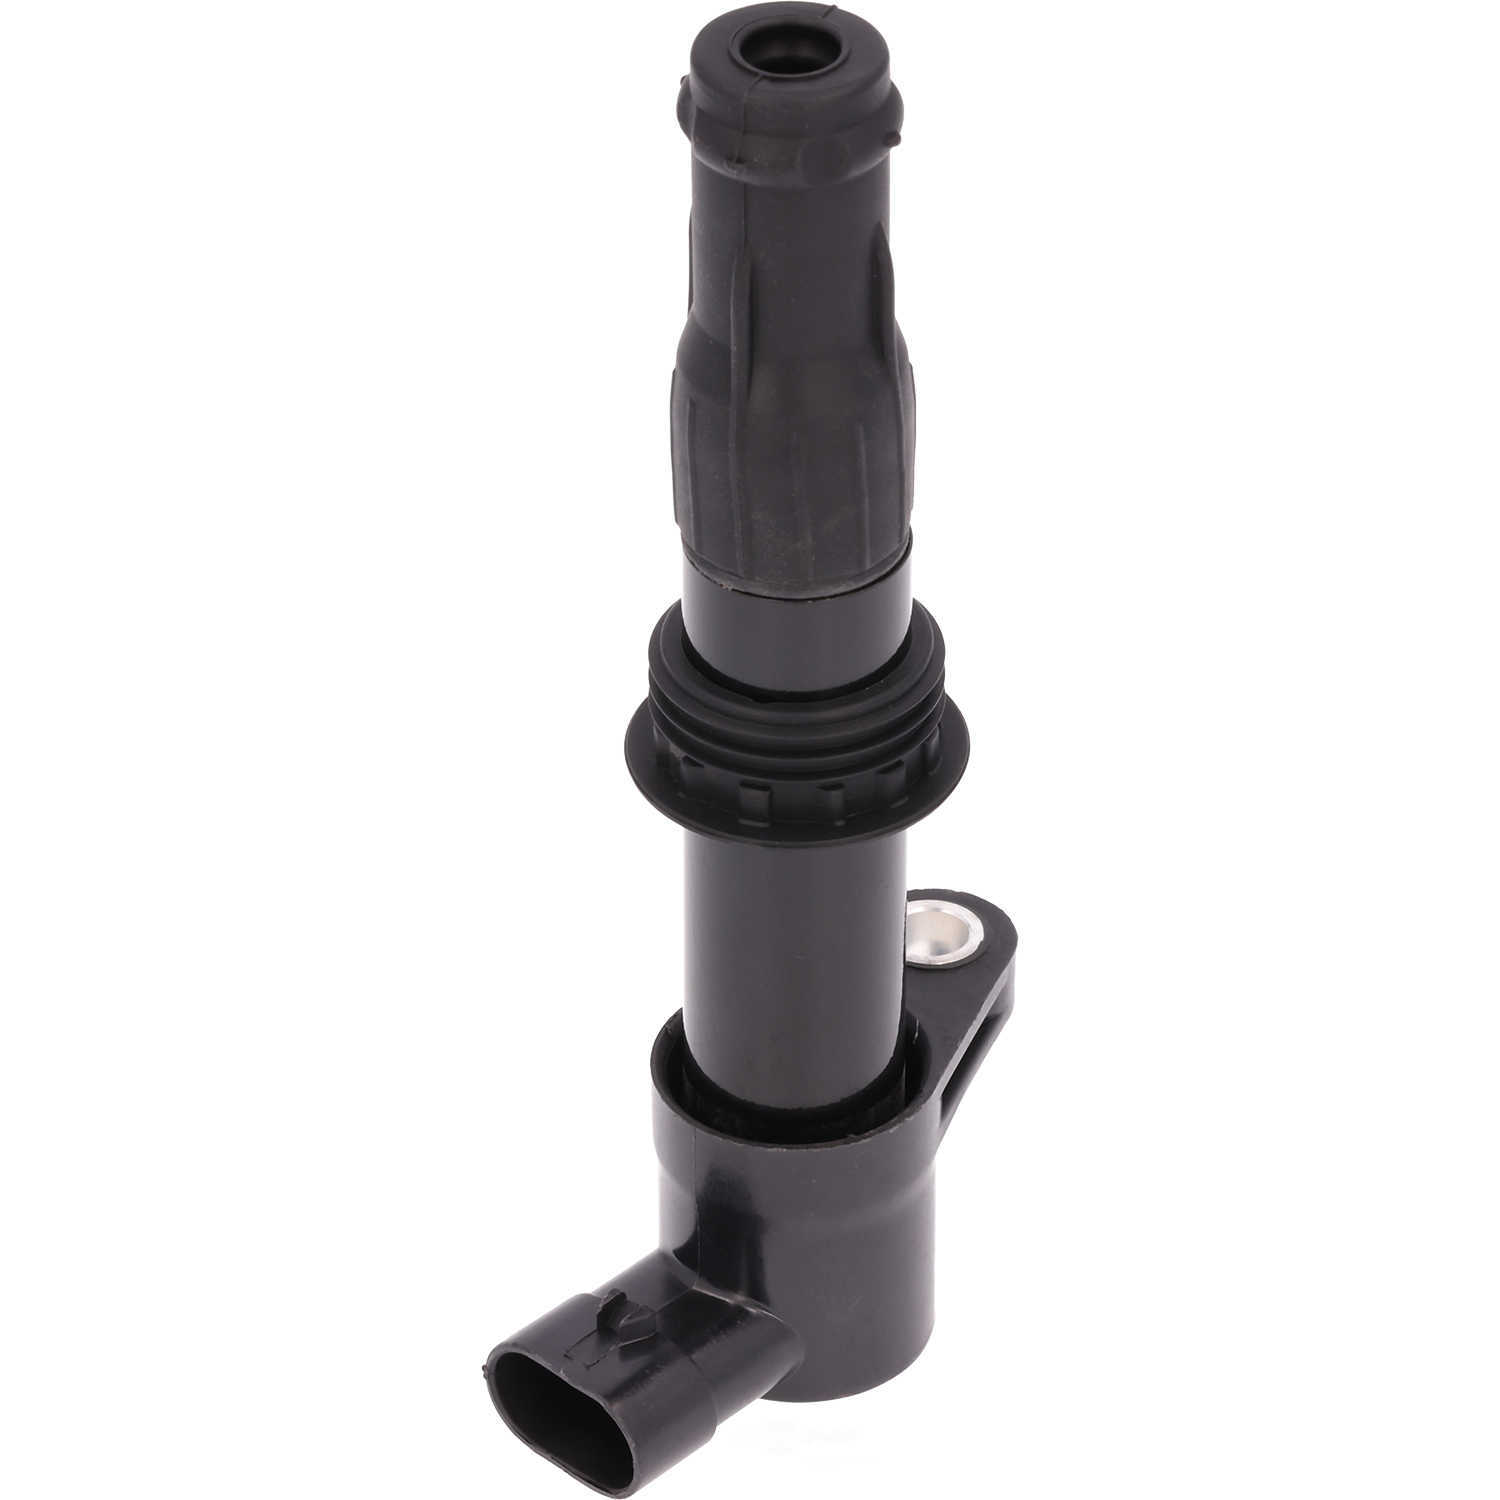 GLOBAL PARTS - Ignition Coil - GBP 1813910